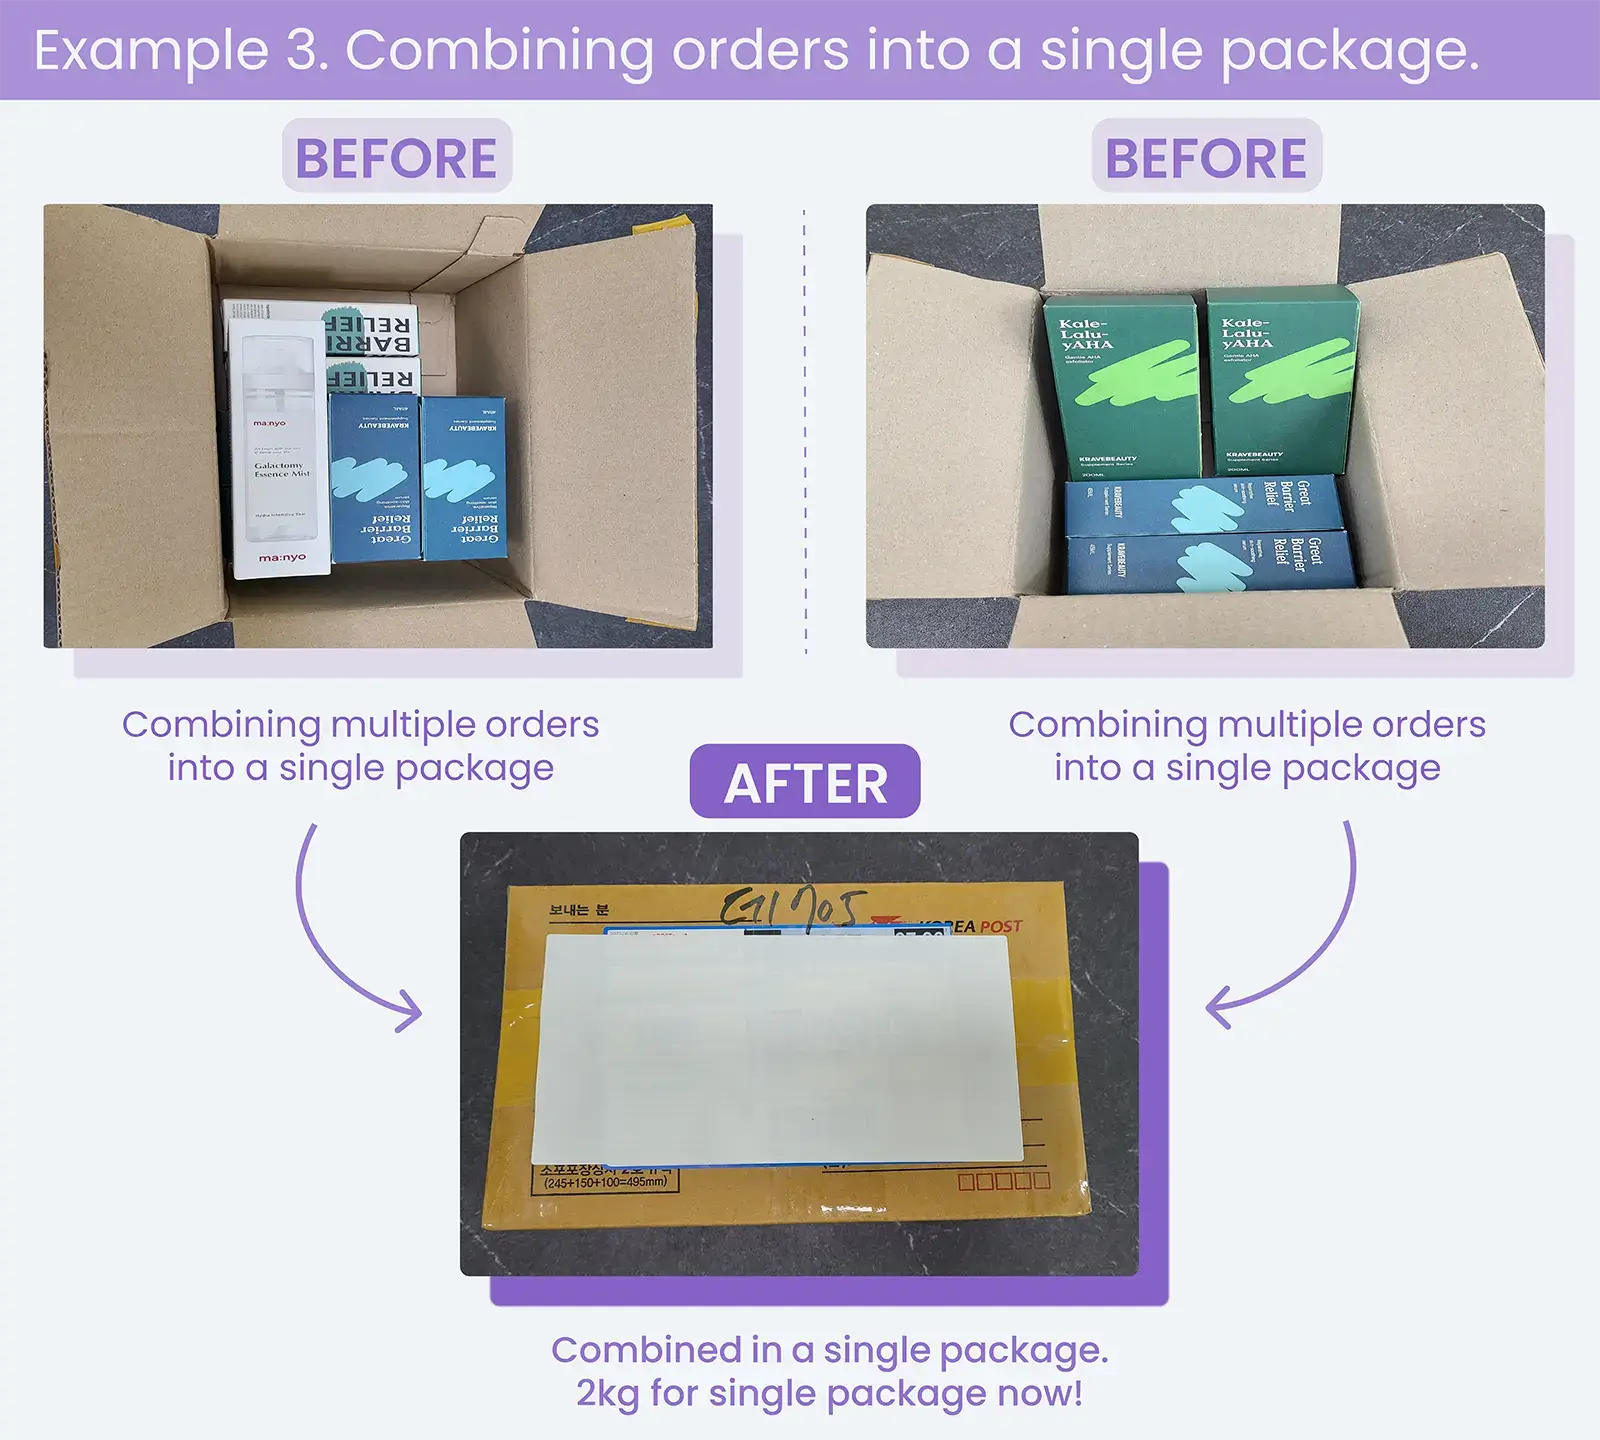 Combining multiple orders into a single package when shipping from Korea